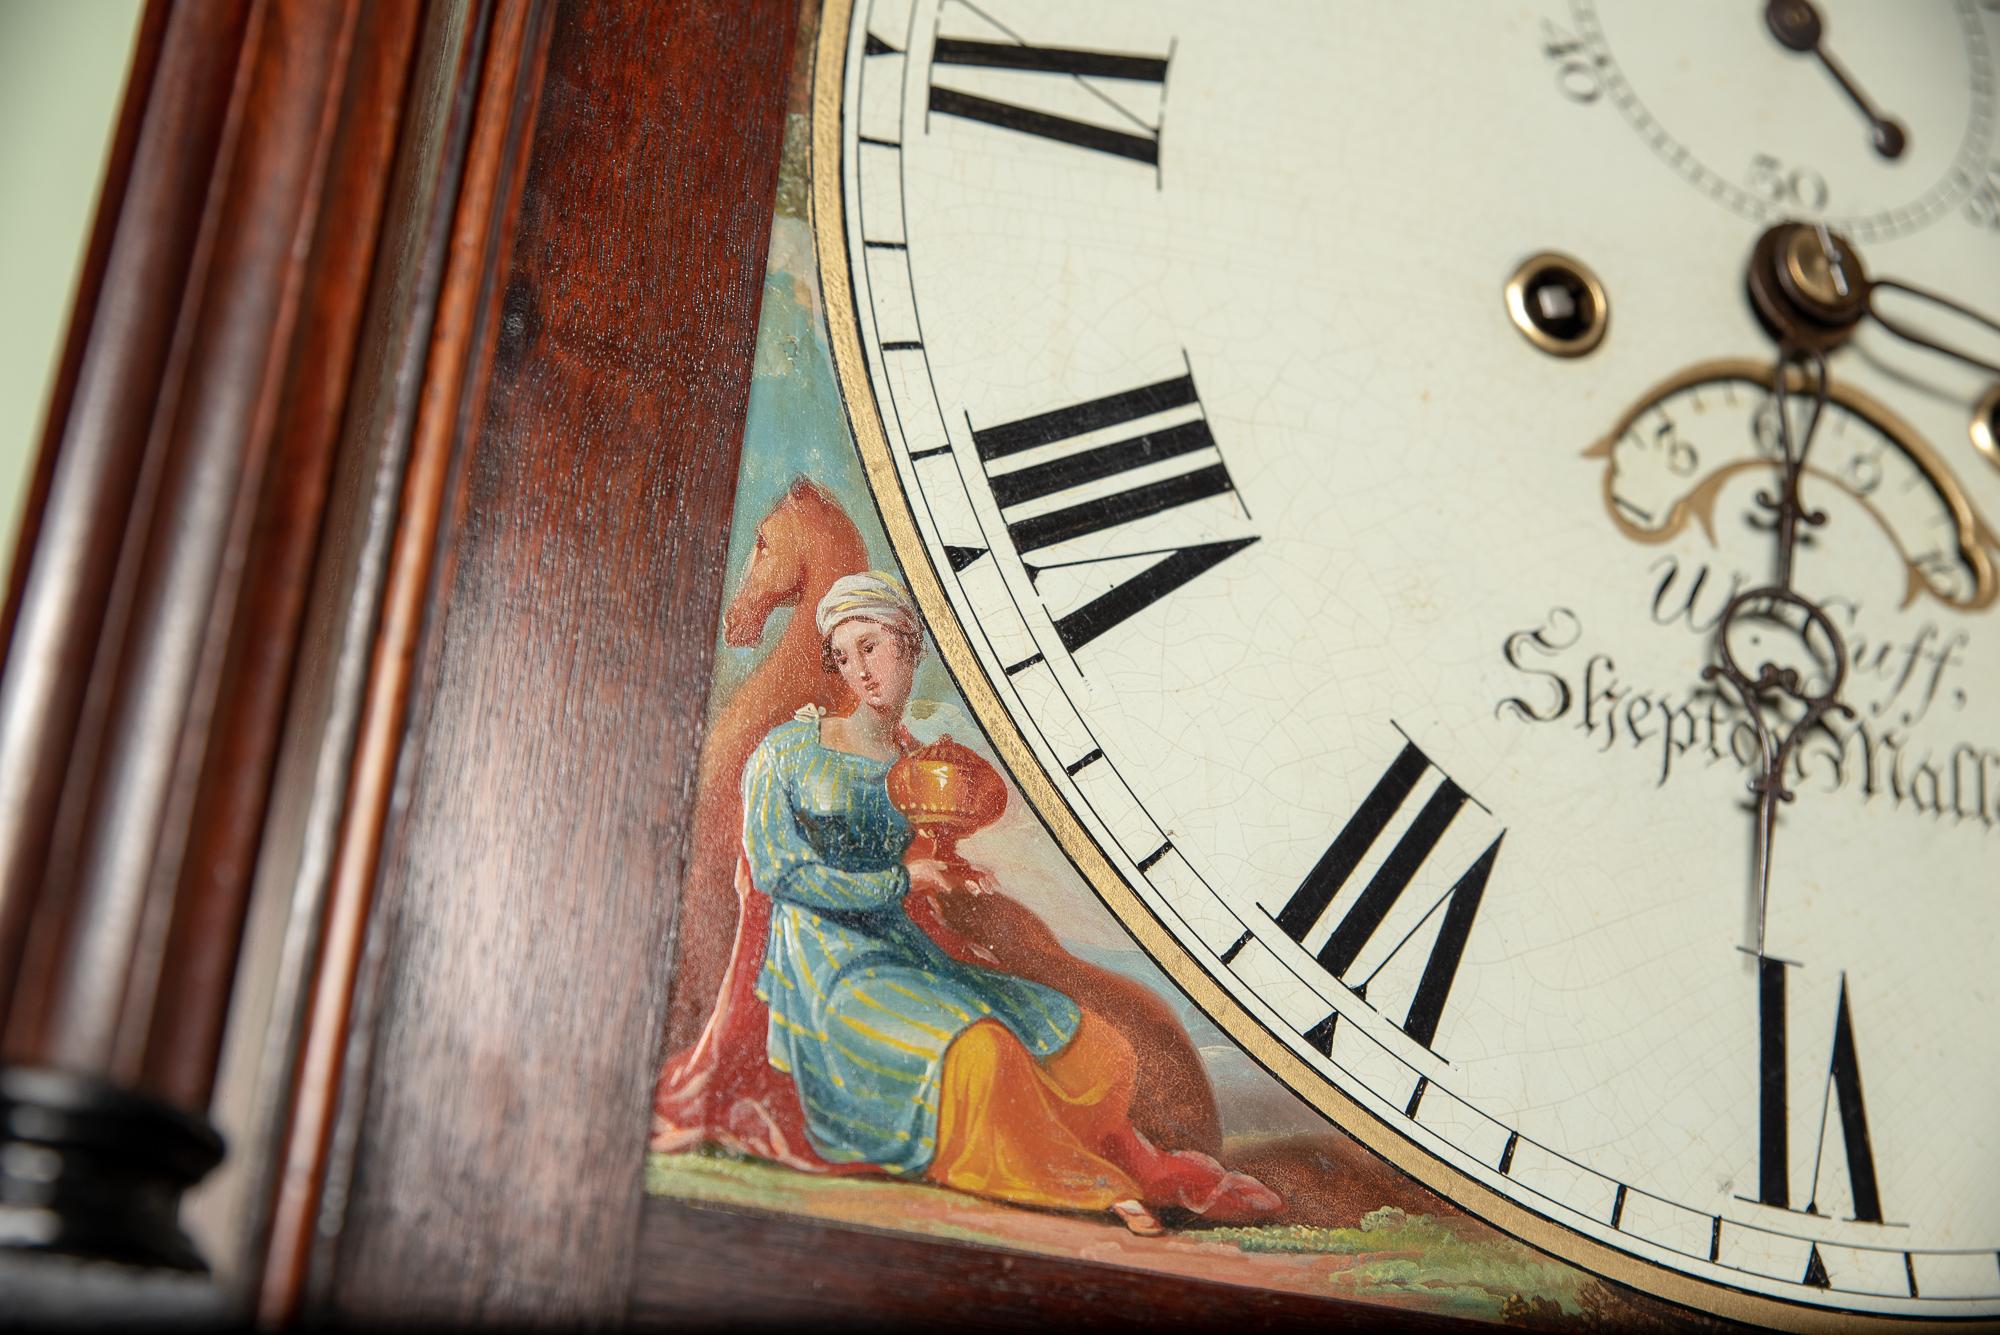 A very good 8 day striking the hours arched painted dial moon phase clock, depicting the four continents of the British Empire.
The maker William Cuff of High St, Shepton Mallet recorded working 1783-1837.
The case is of flame mahogany with ebony